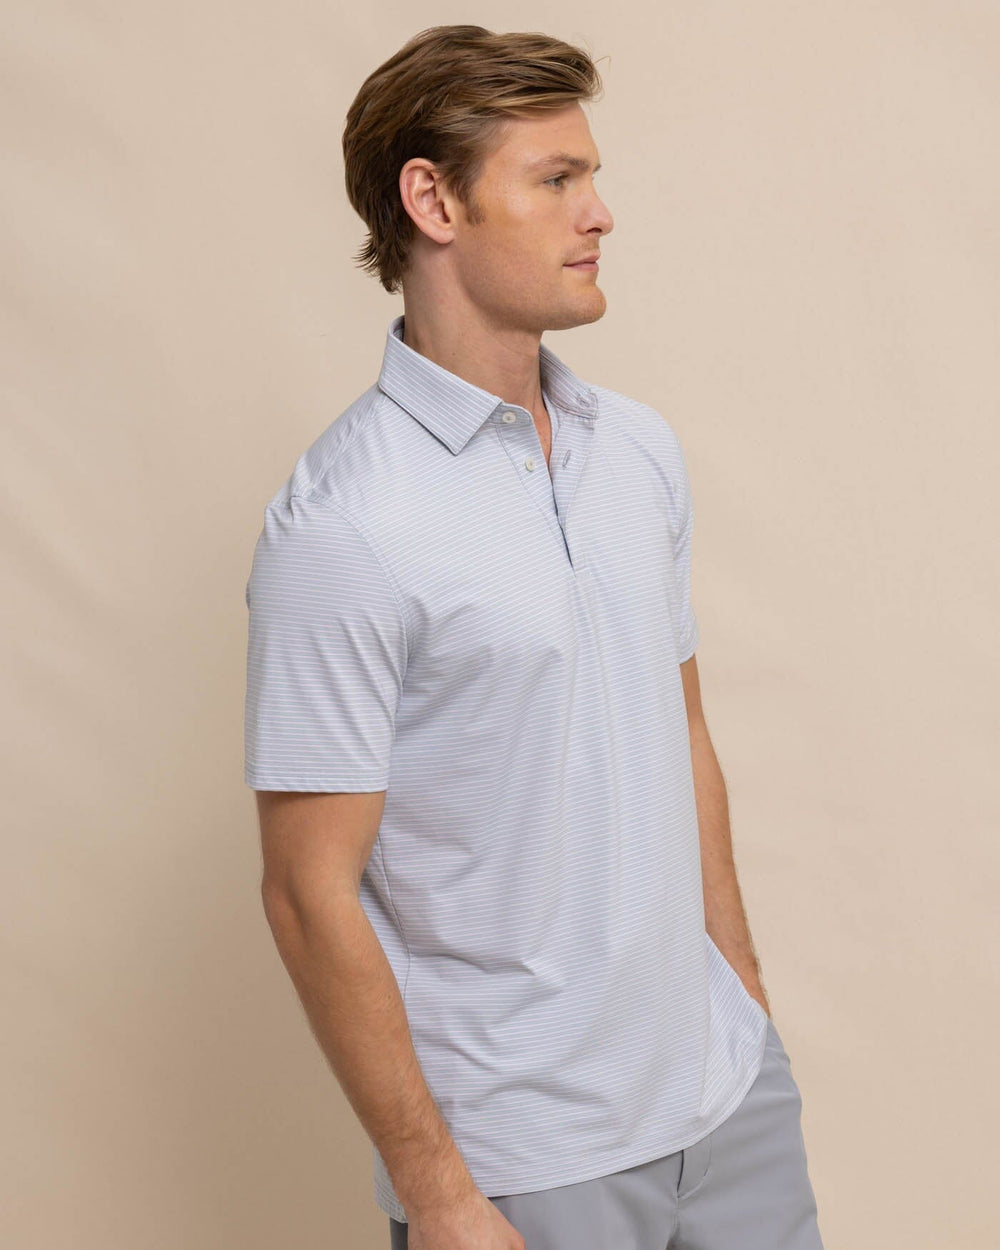 The front view of the Southern Tide brrr-eeze Baytop Stripe Performance Polo by Southern Tide - Platinum Grey